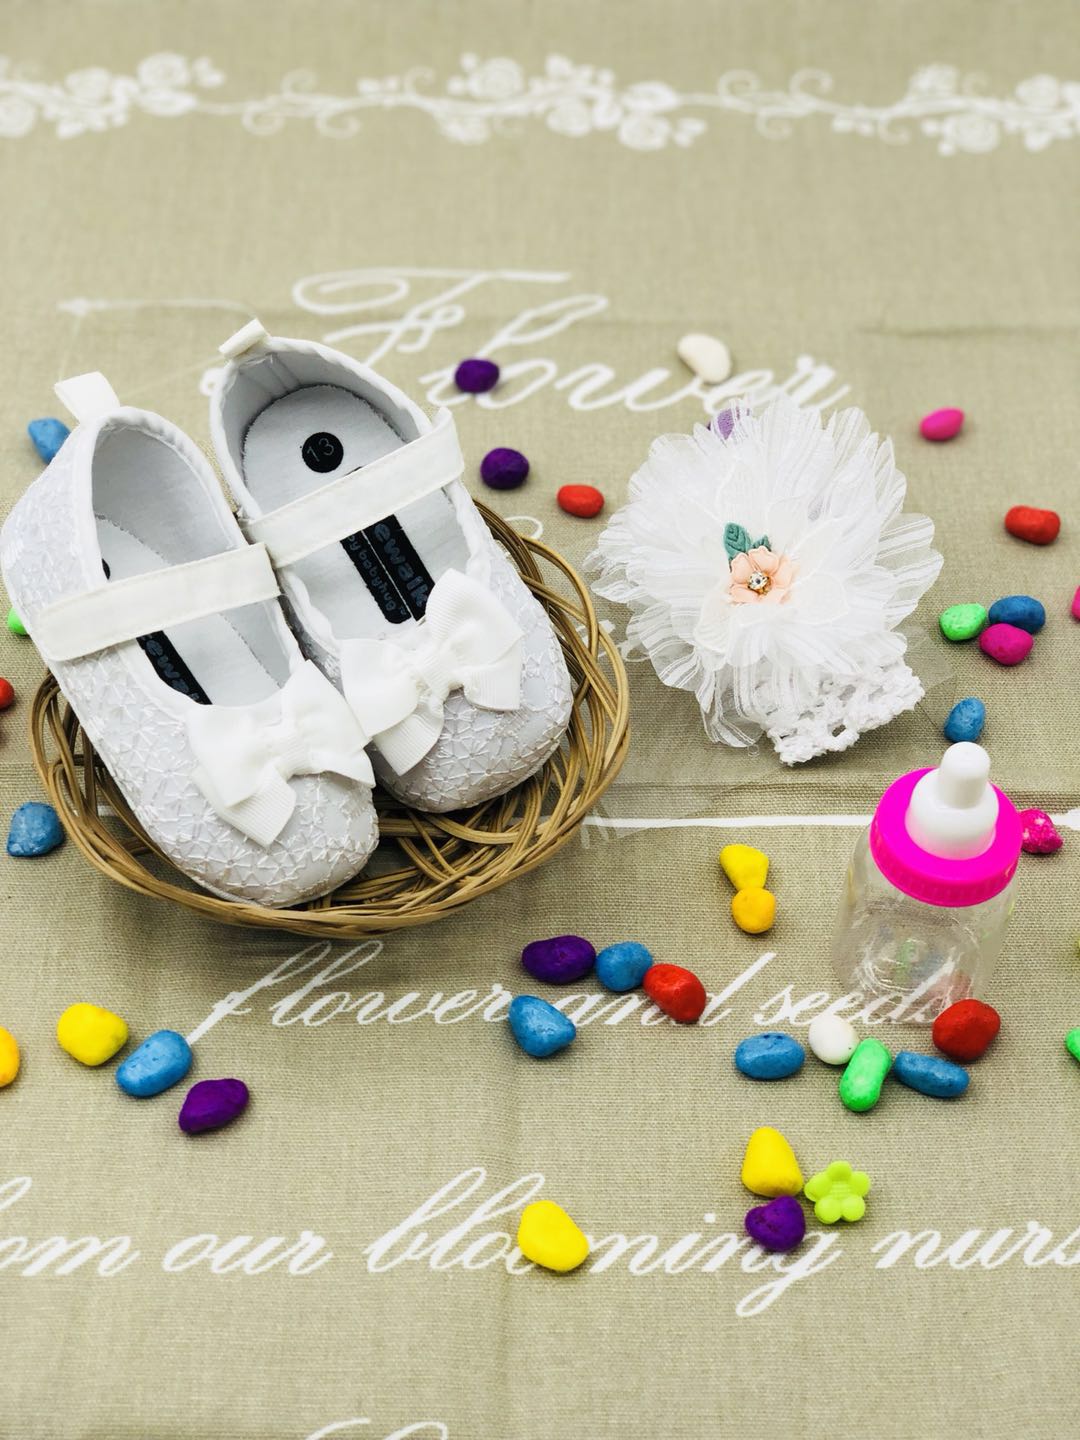 Lucky Baby Shoes Children Footwear New Born Baby Shoes SKU-BBS